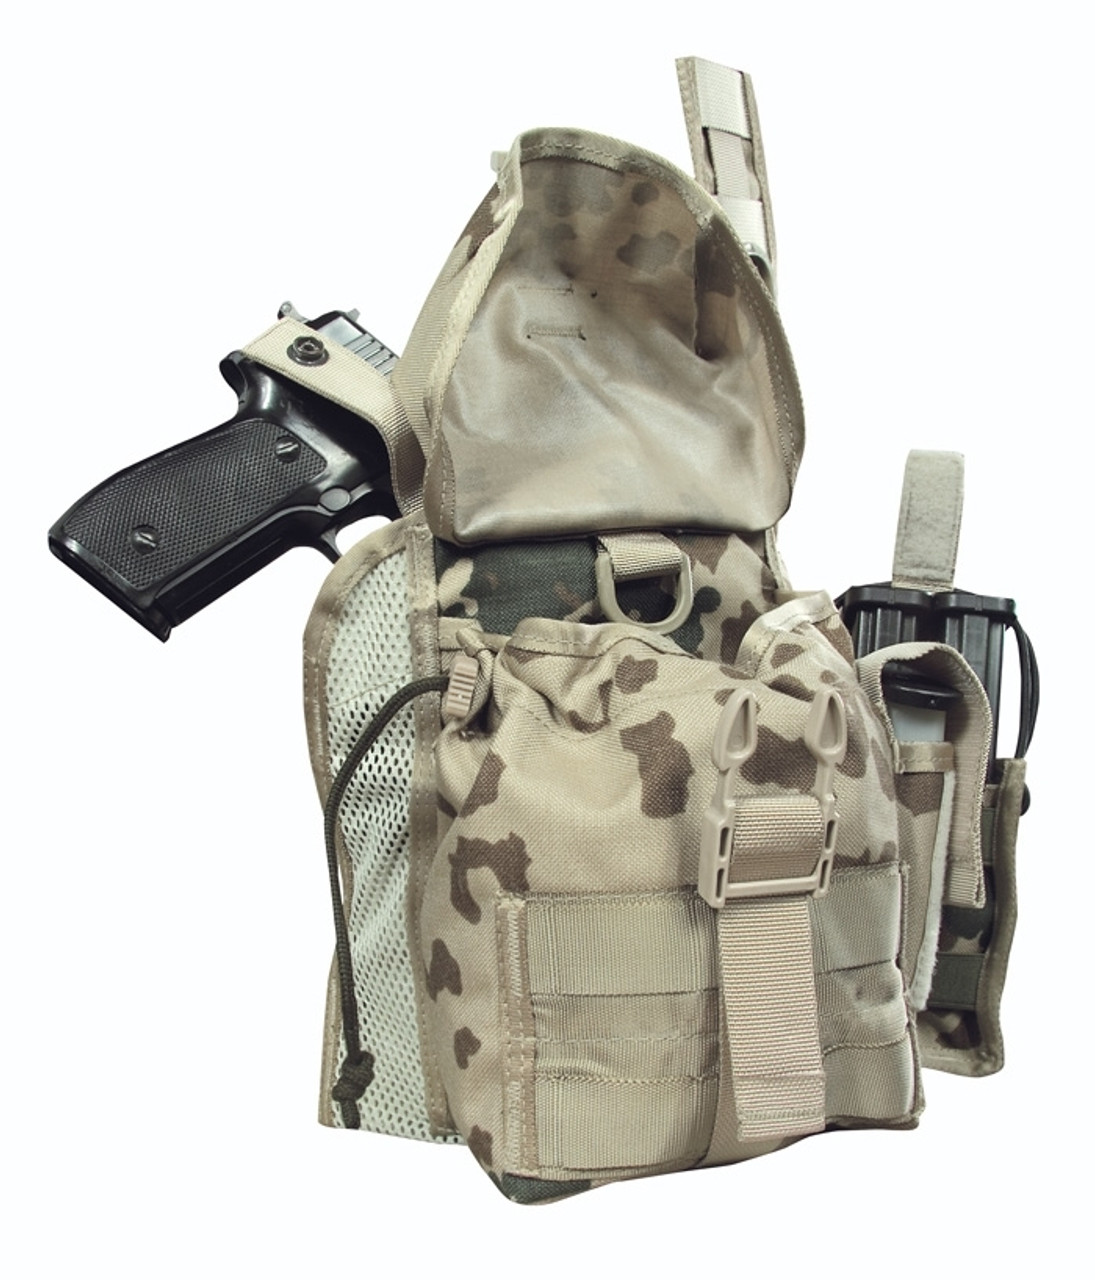 75TACTICAL CHEST RIG ALPHA - TROPENTARN from Hessen Antique